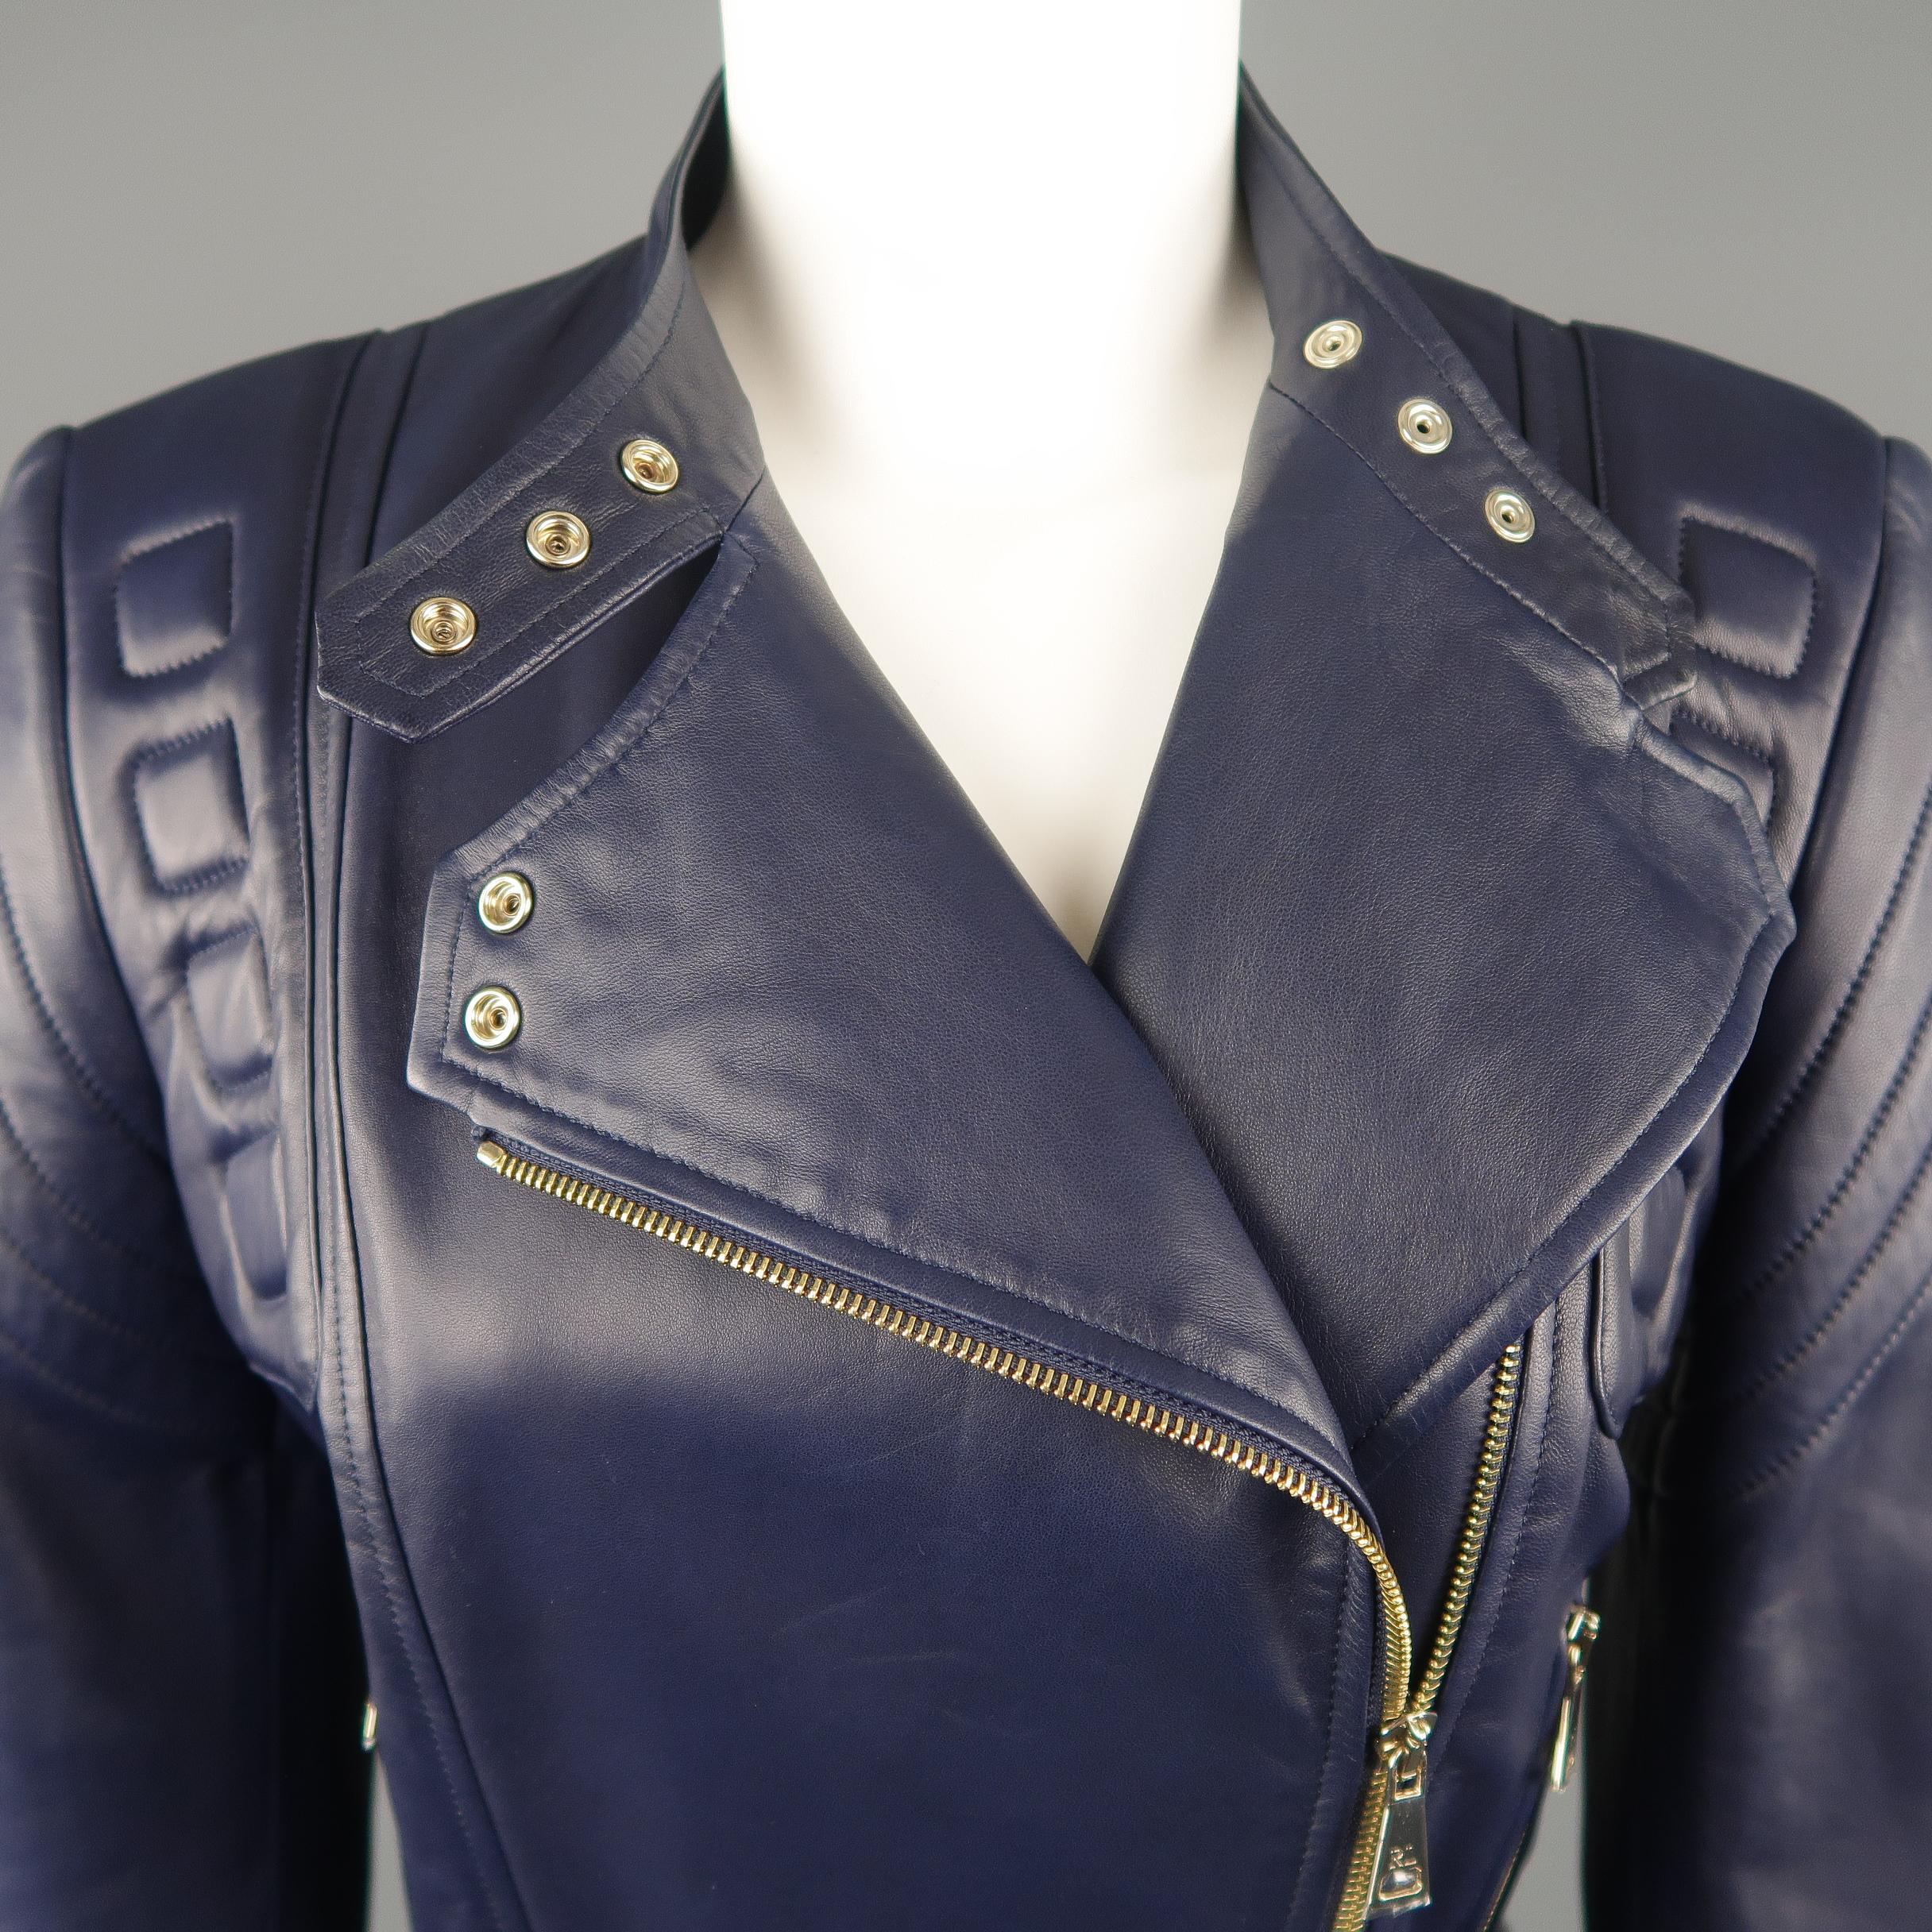 RALPH LAUREN COLLECTION biker jacket comes in smooth navy blue lambskin leather with a snap band collar, double breasted asymmetrical zip closure, zip pockets and cuffs, side belts, and padded quilted shoulder details. Never worn. Hardware wrapped.